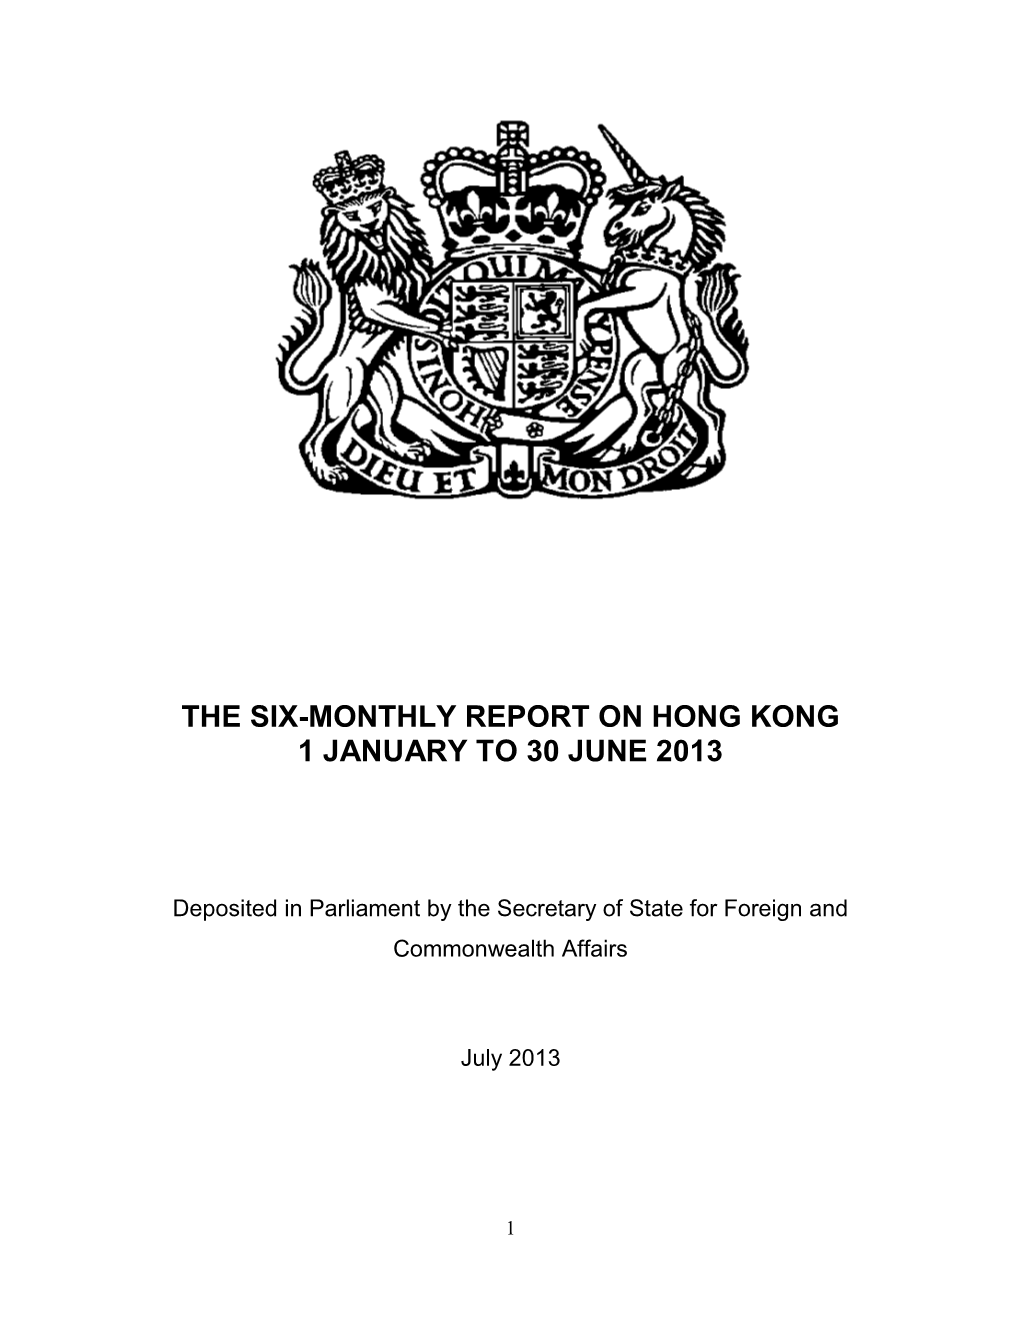 The Six-Monthly Report on Hong Kong 1 January to 30 June 2013